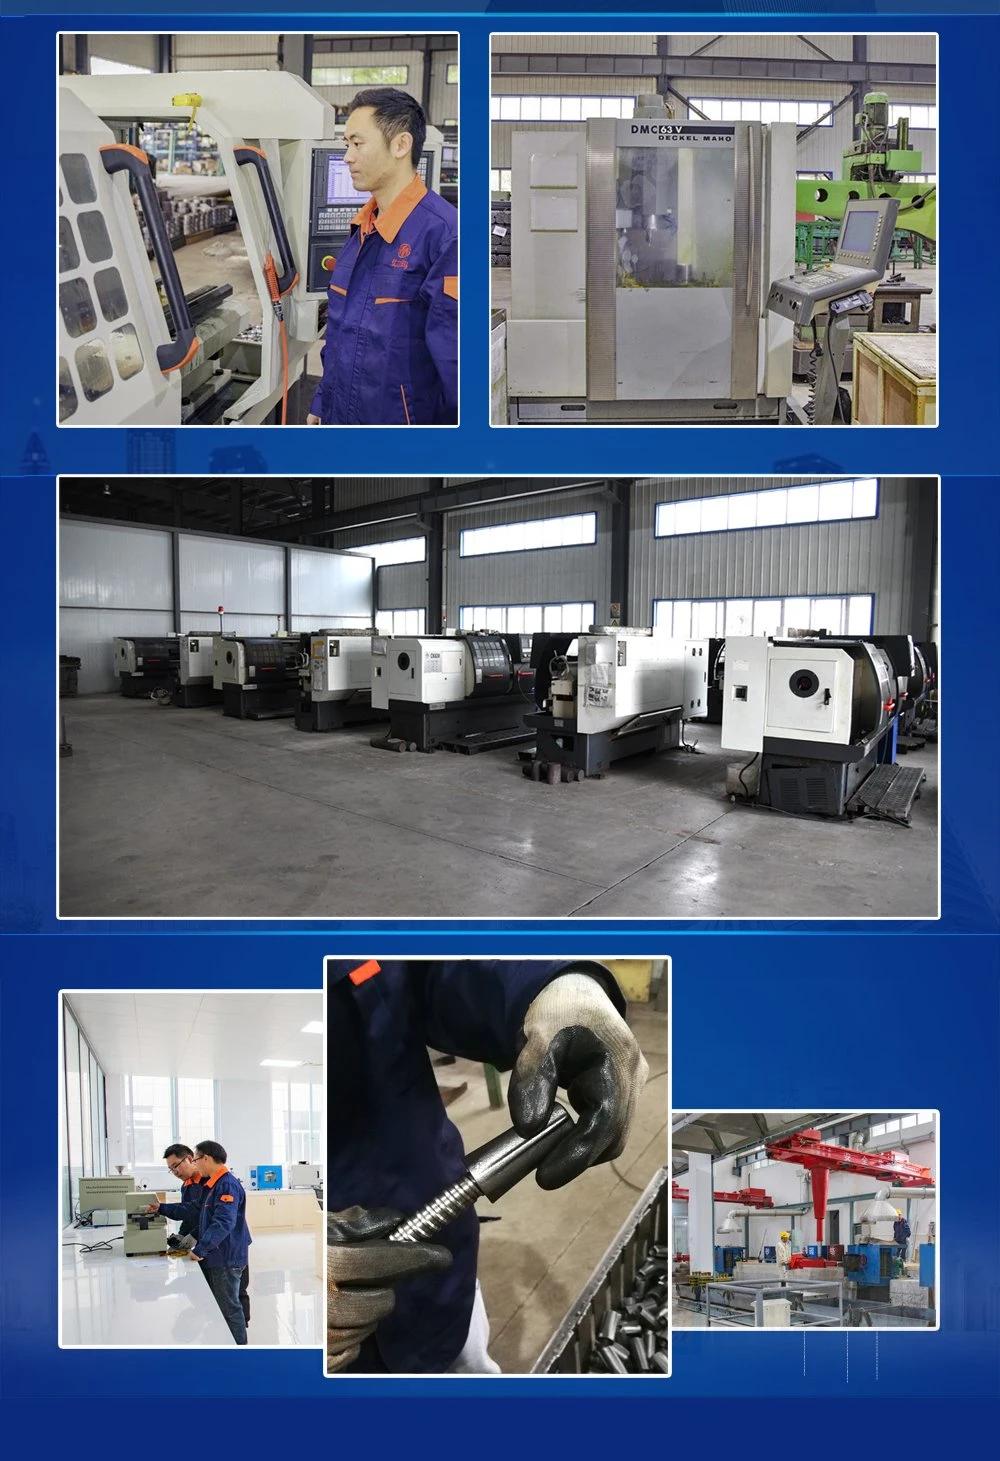 Casting,Forging,Pressing,Assembling,Component,Construction,Warehouse,Basement,Electricity,Pump,Hydraulic,Water Pressure,Auto Part,Subway,Railway,Road,Nuts,Power